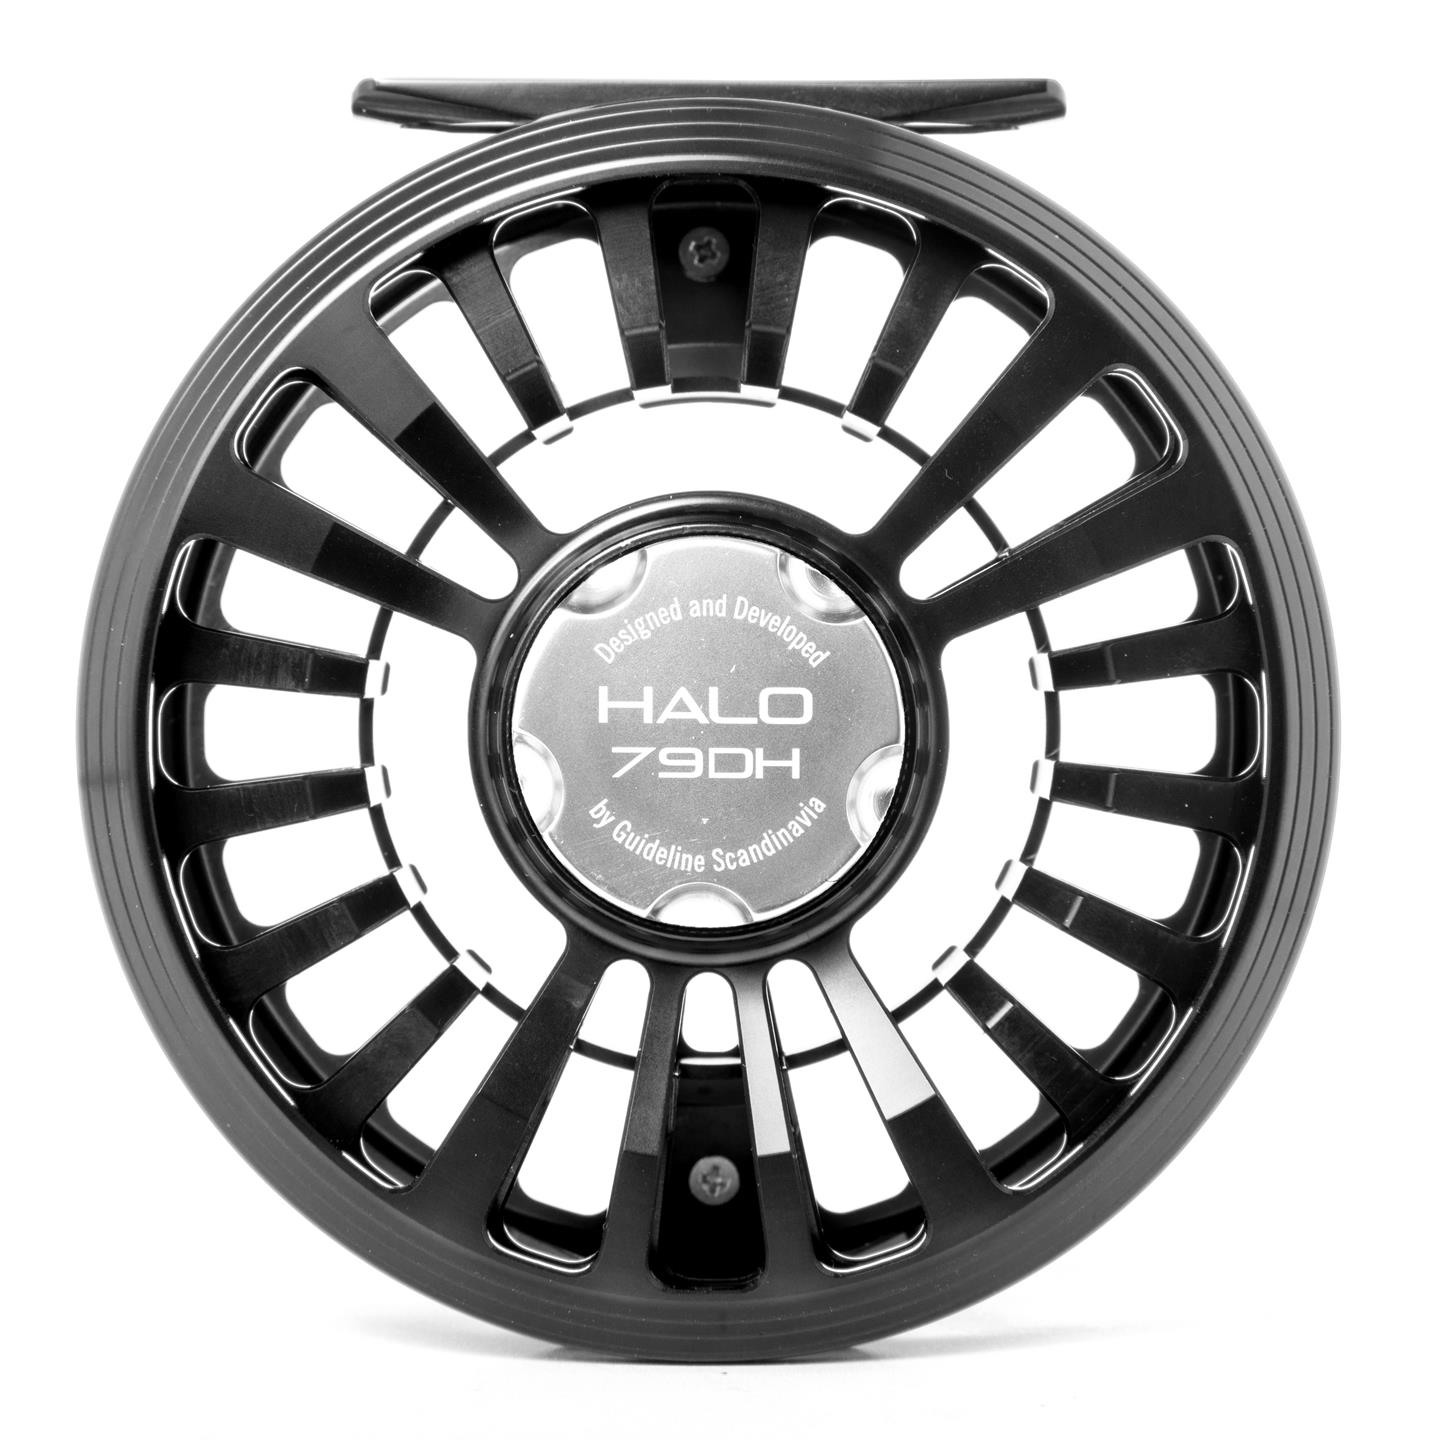 Guideline Halo Black stealth #7/9 DH